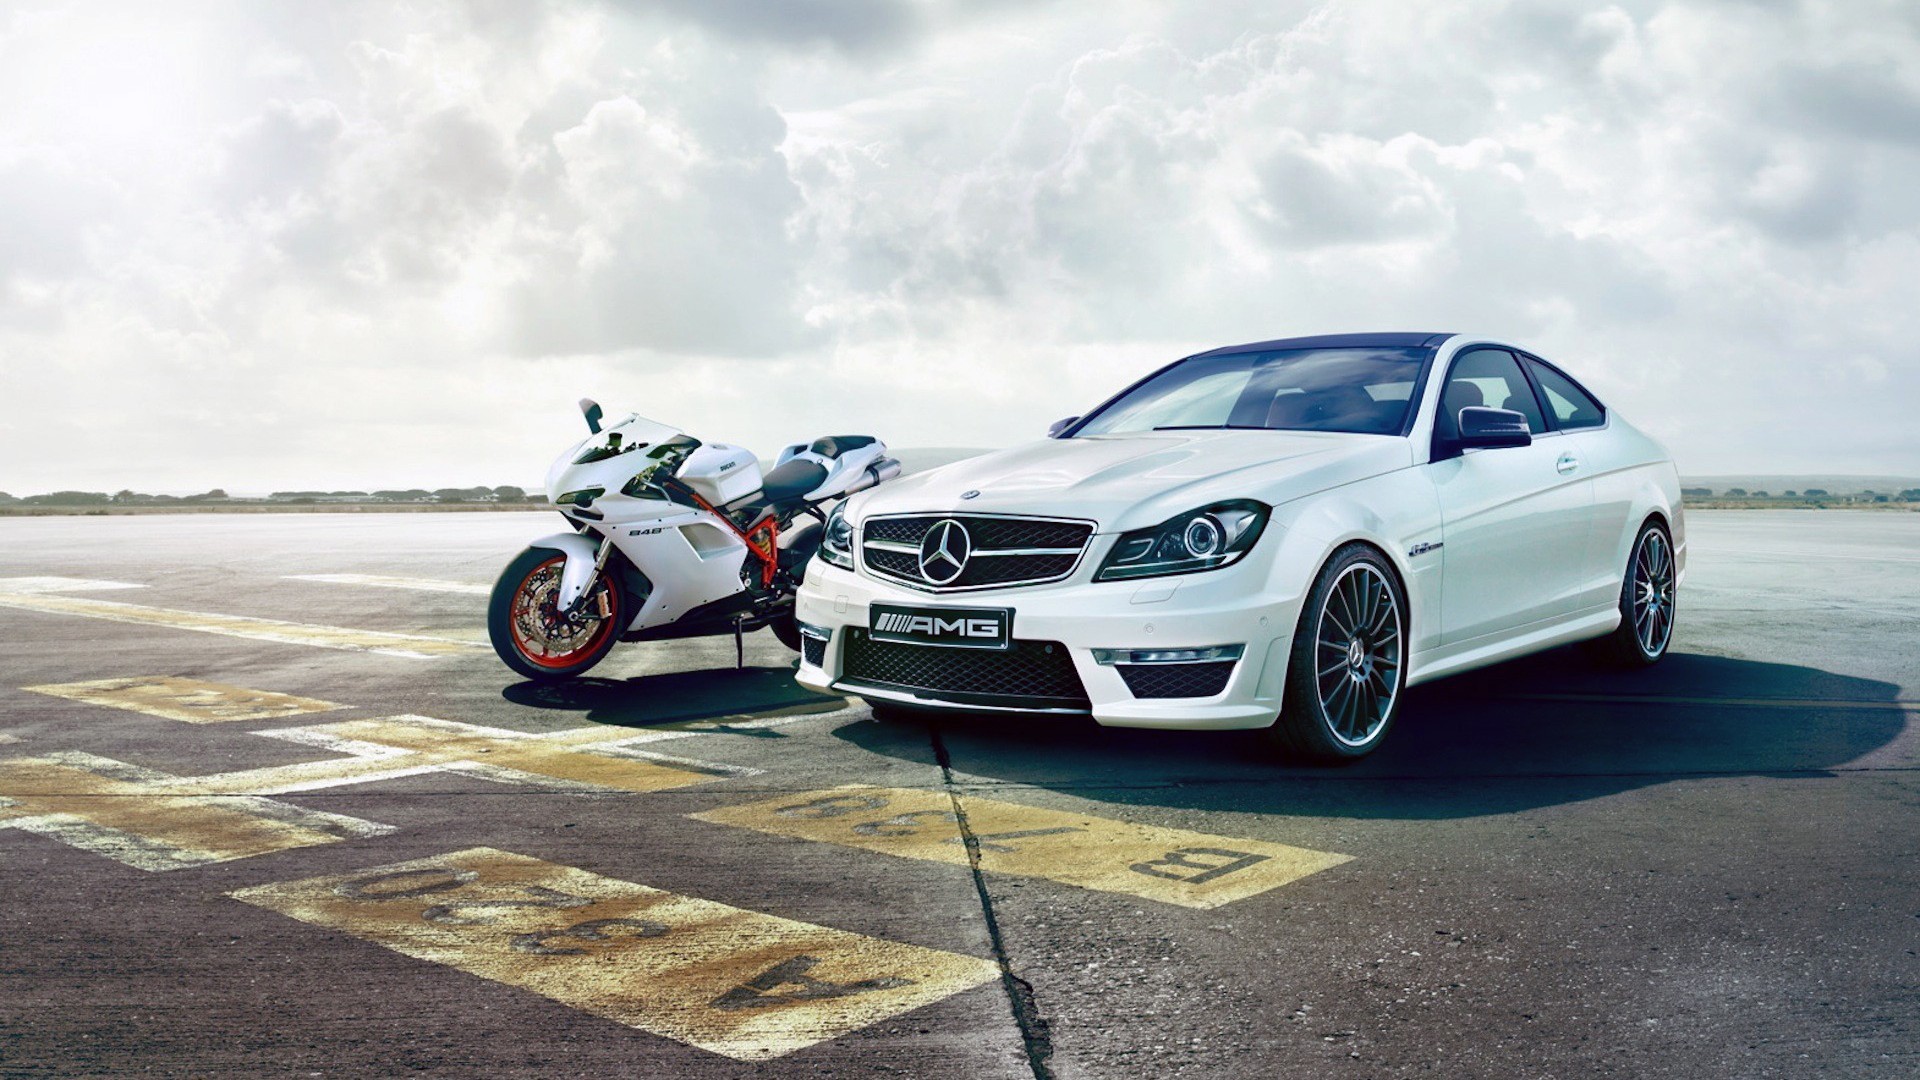 Motorcycle Ducati And Mercedes C63 Amg Wallpaper